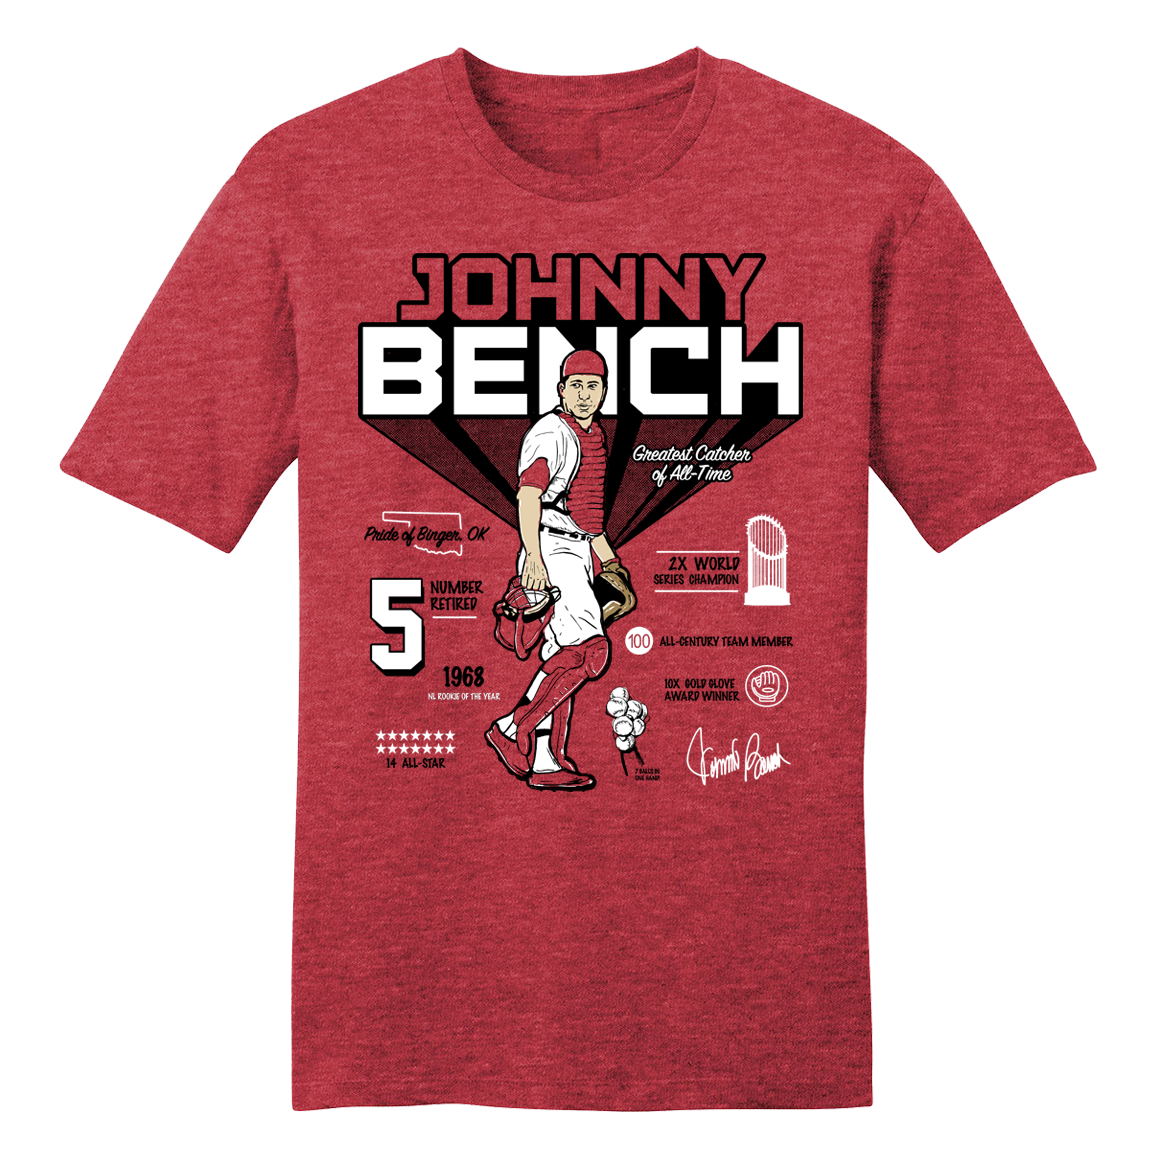 Johnny Bench All-Time Greatest Catcher - Cincy Shirts